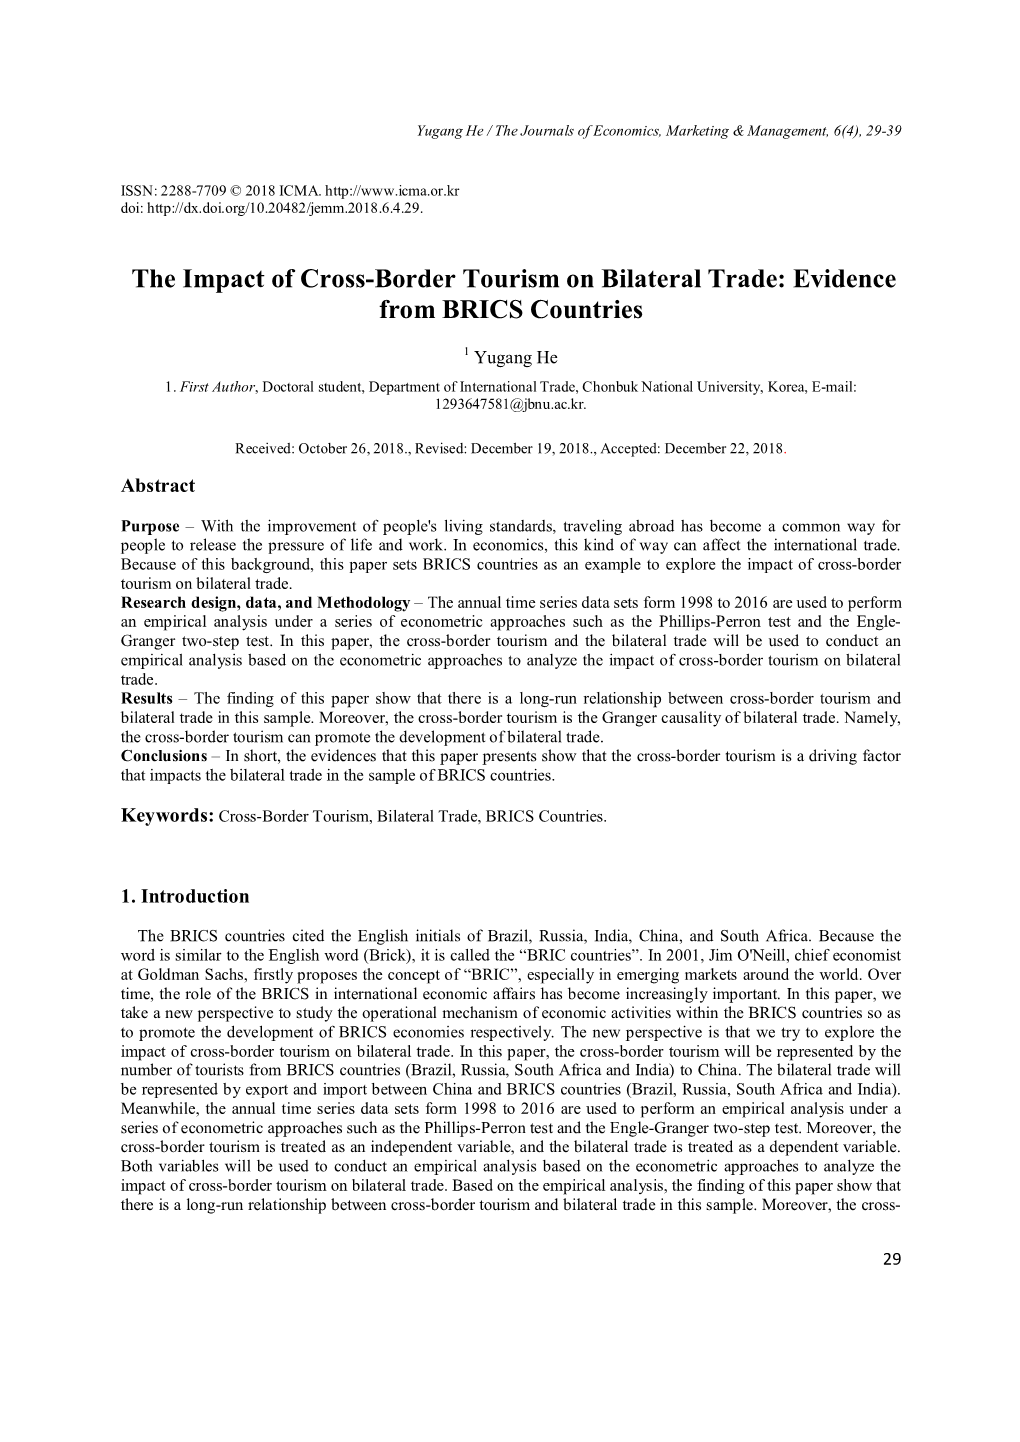 The Impact of Cross-Border Tourism on Bilateral Trade: Evidence from BRICS Countries